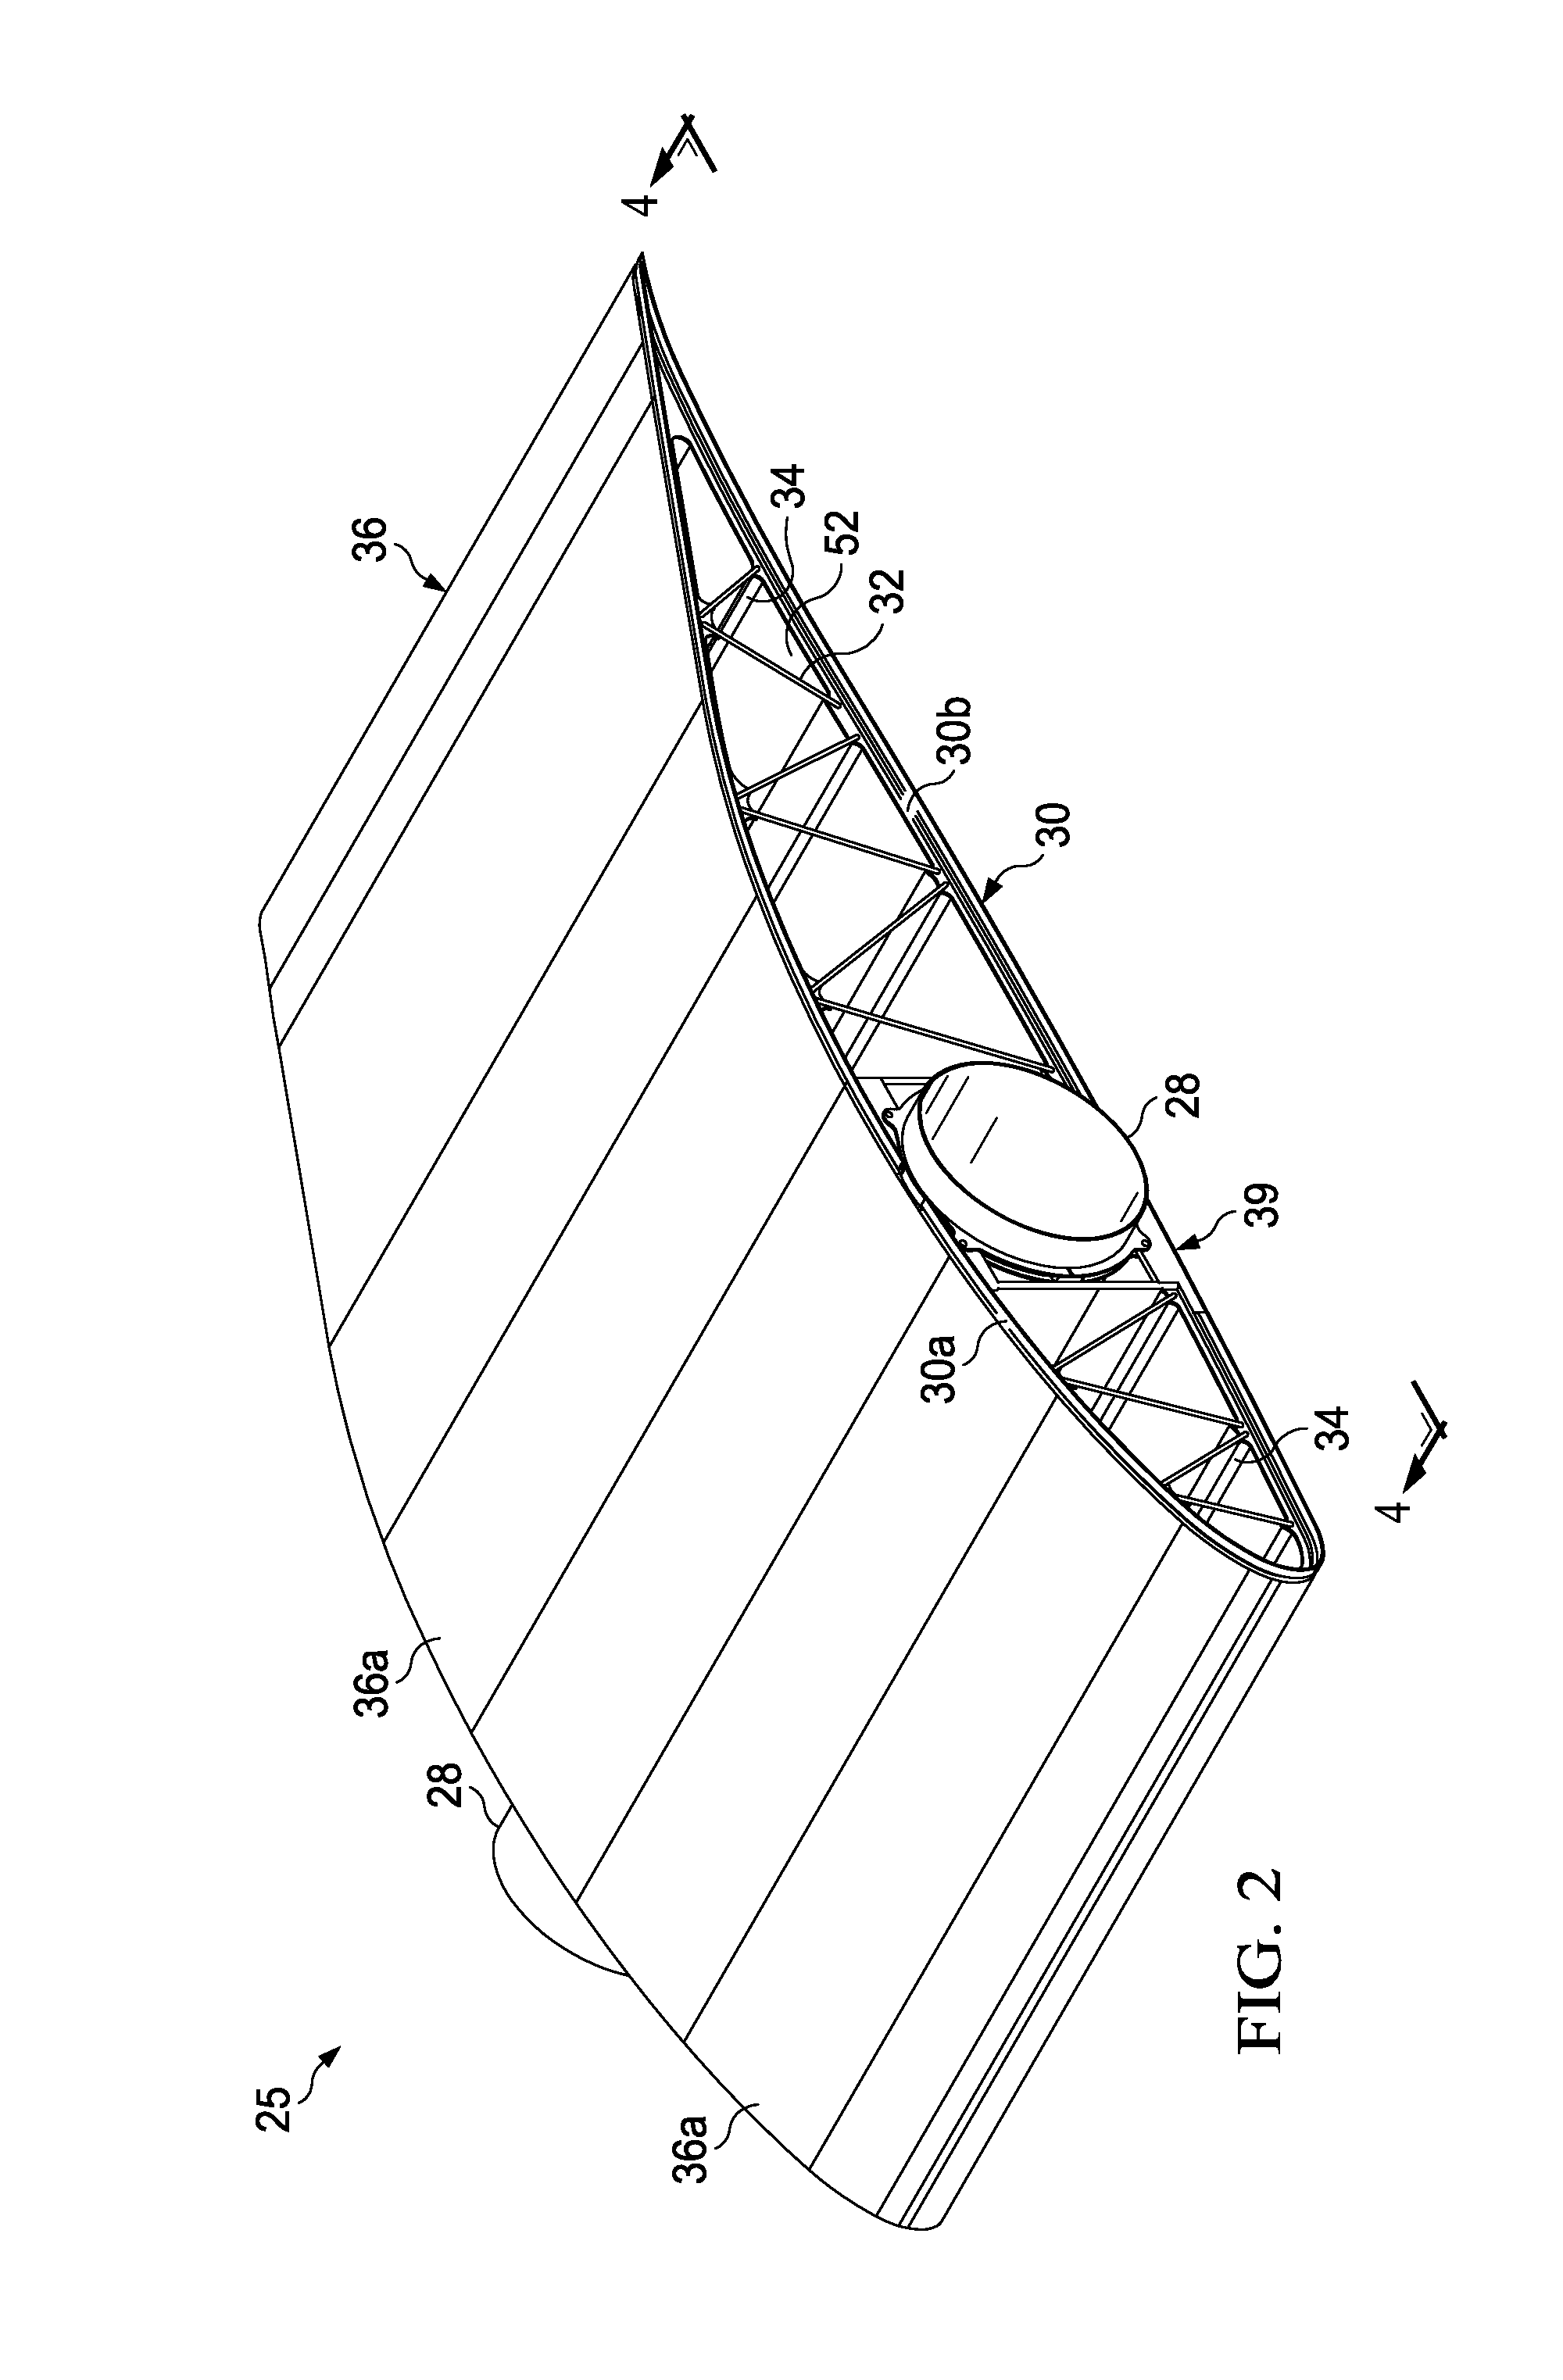 Attachment of aircraft ribs to spars having variable geometry